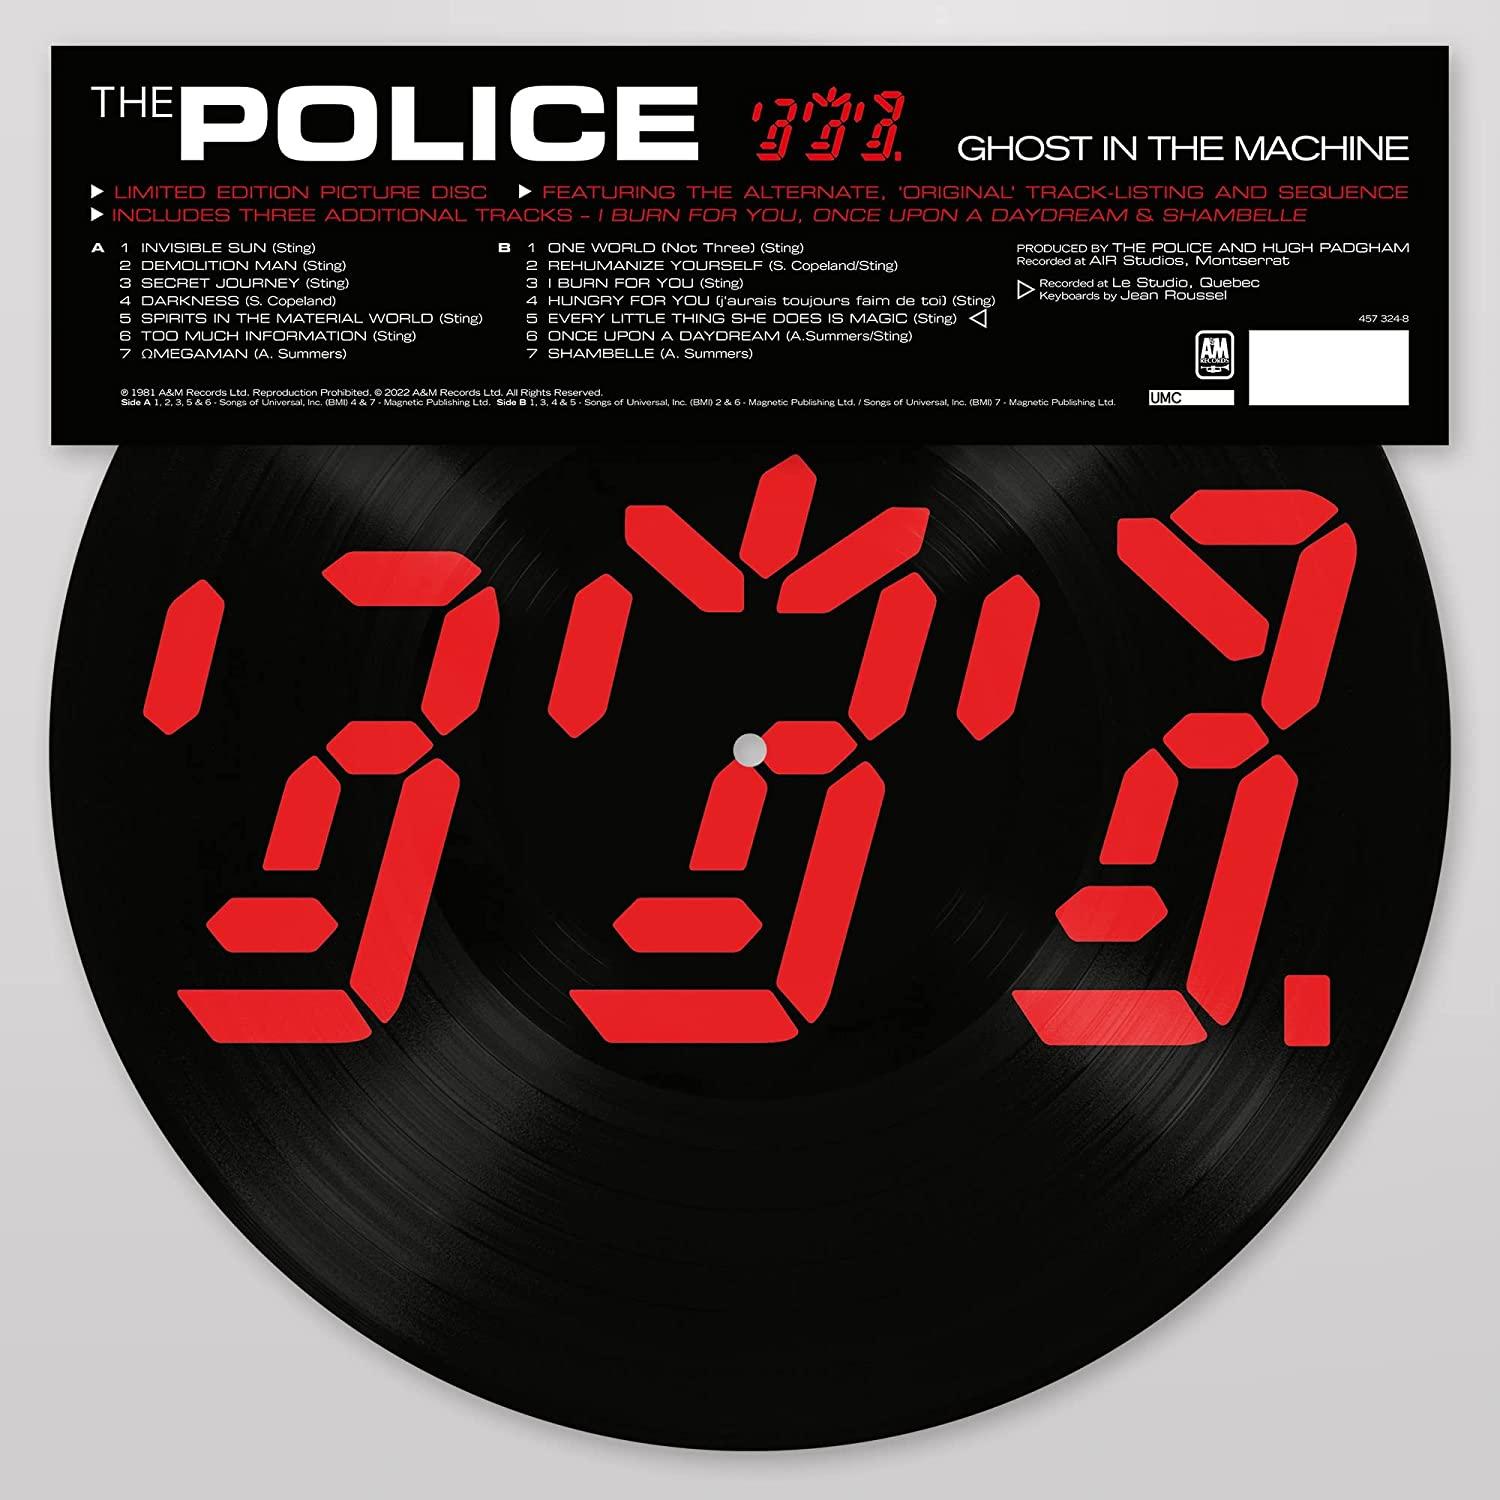 The Police - Ghost in the Machine (1981) LP